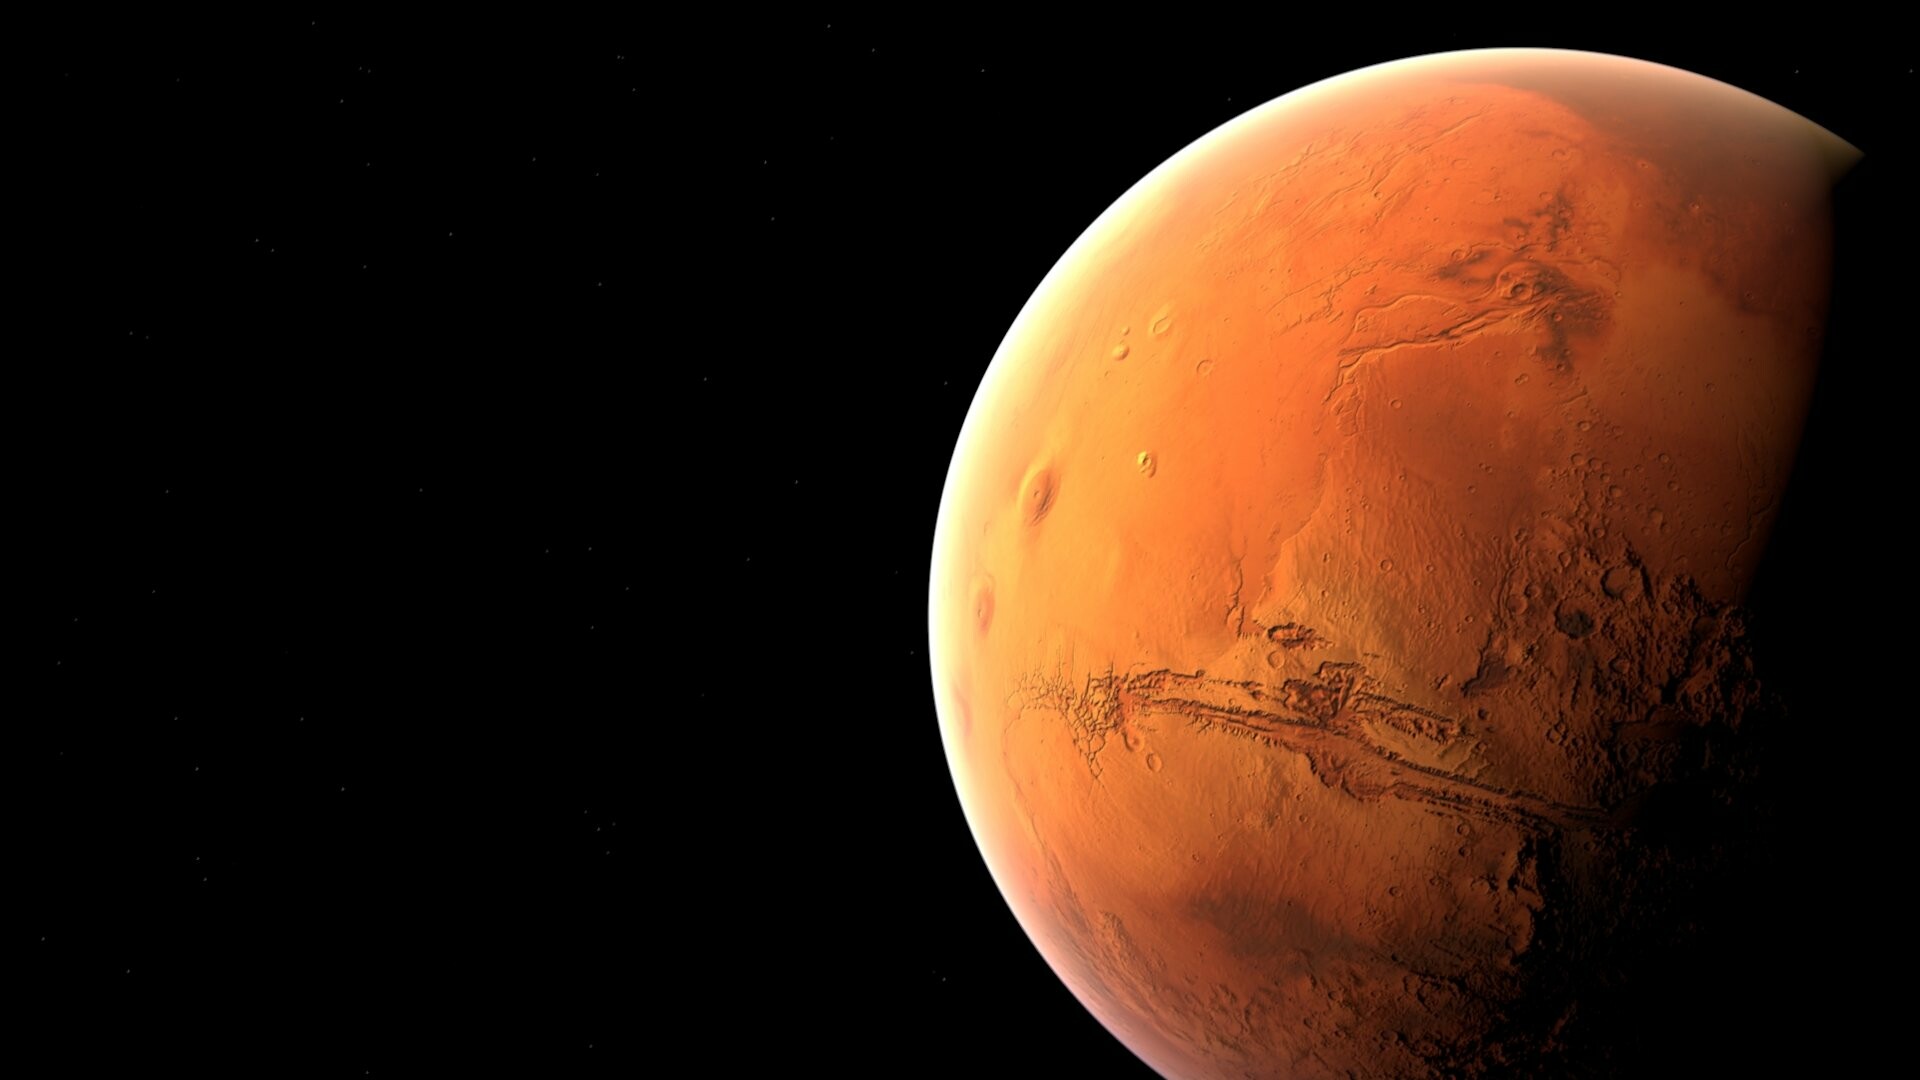 Mars: A small planet, larger than only Mercury and slightly more than half the size of Earth. 1920x1080 Full HD Wallpaper.